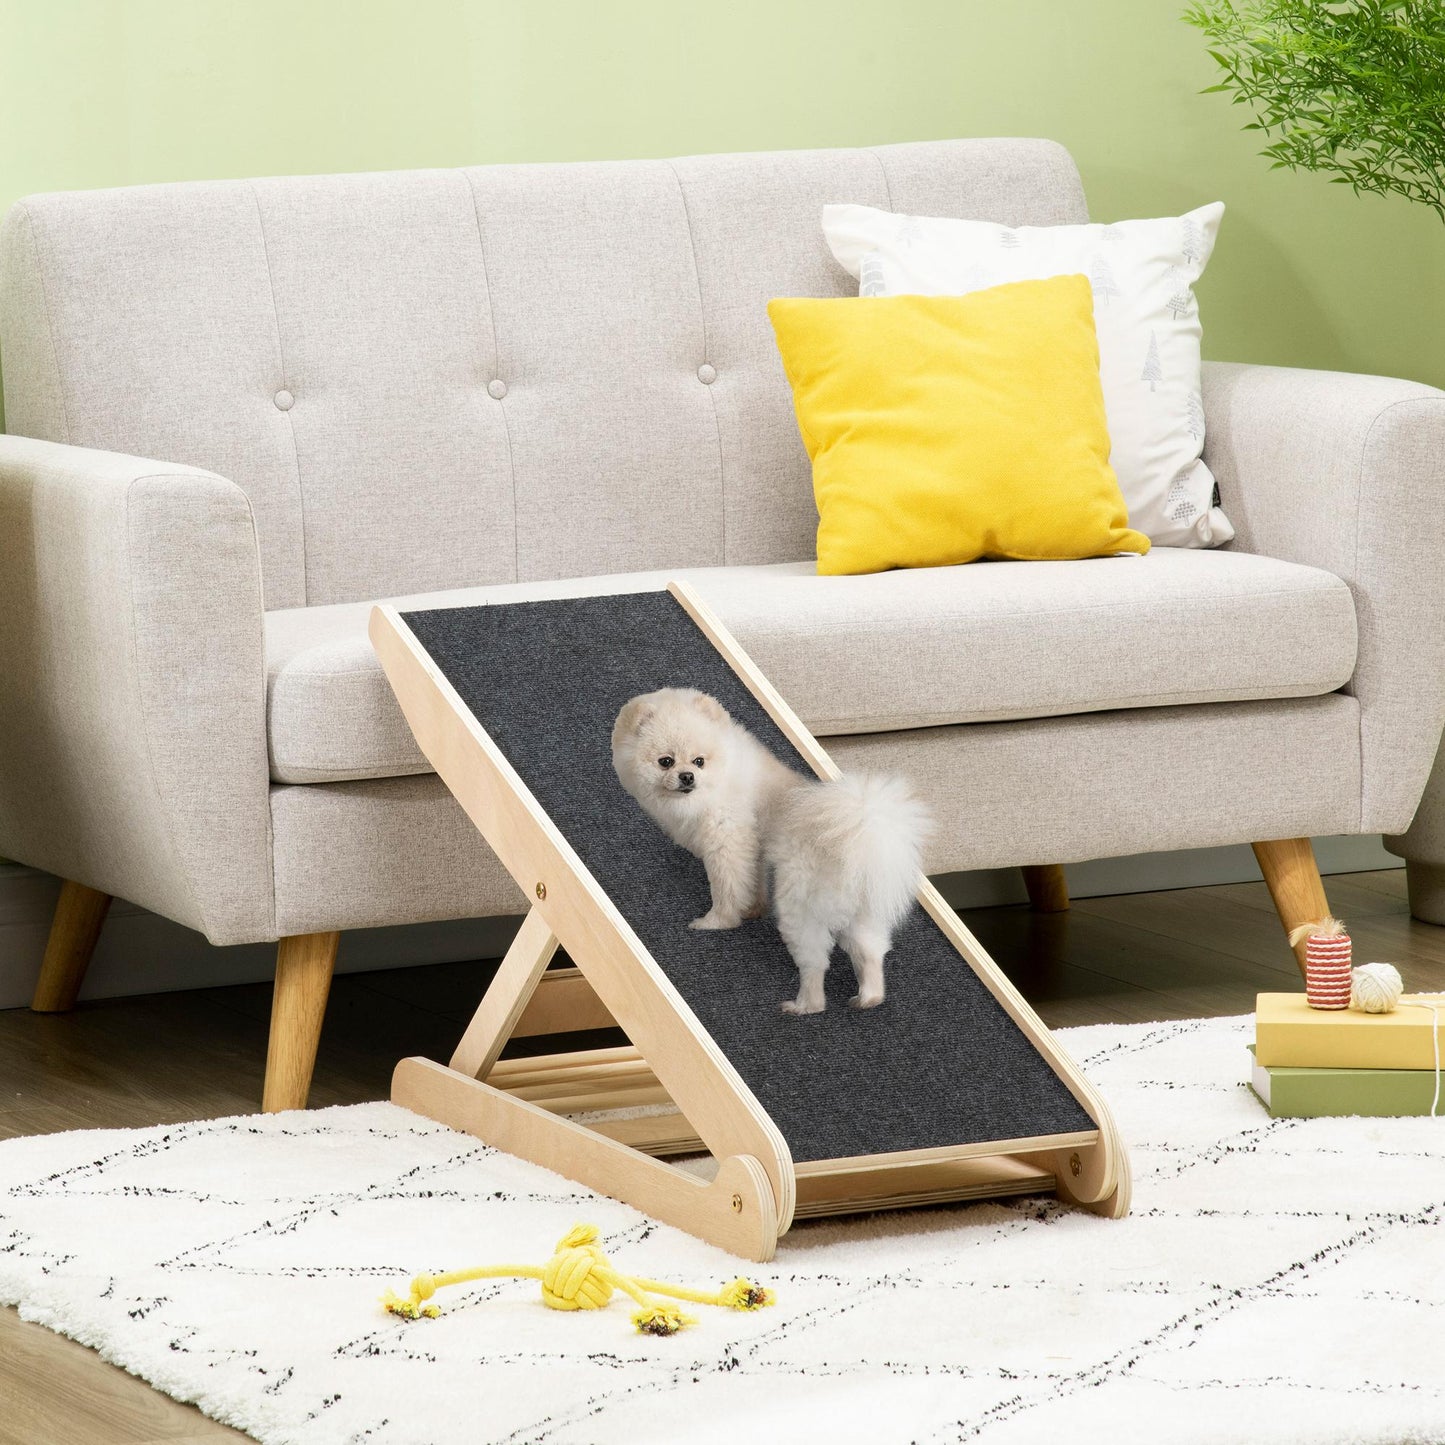 Dog Ramp for Bed Couch, Foldable Pet Ramp Height Adjustable 4 Levels from 14.75" to 24.5" for Cats and Small Dogs with Non-Slip Carpeted Surface, Natural at Gallery Canada